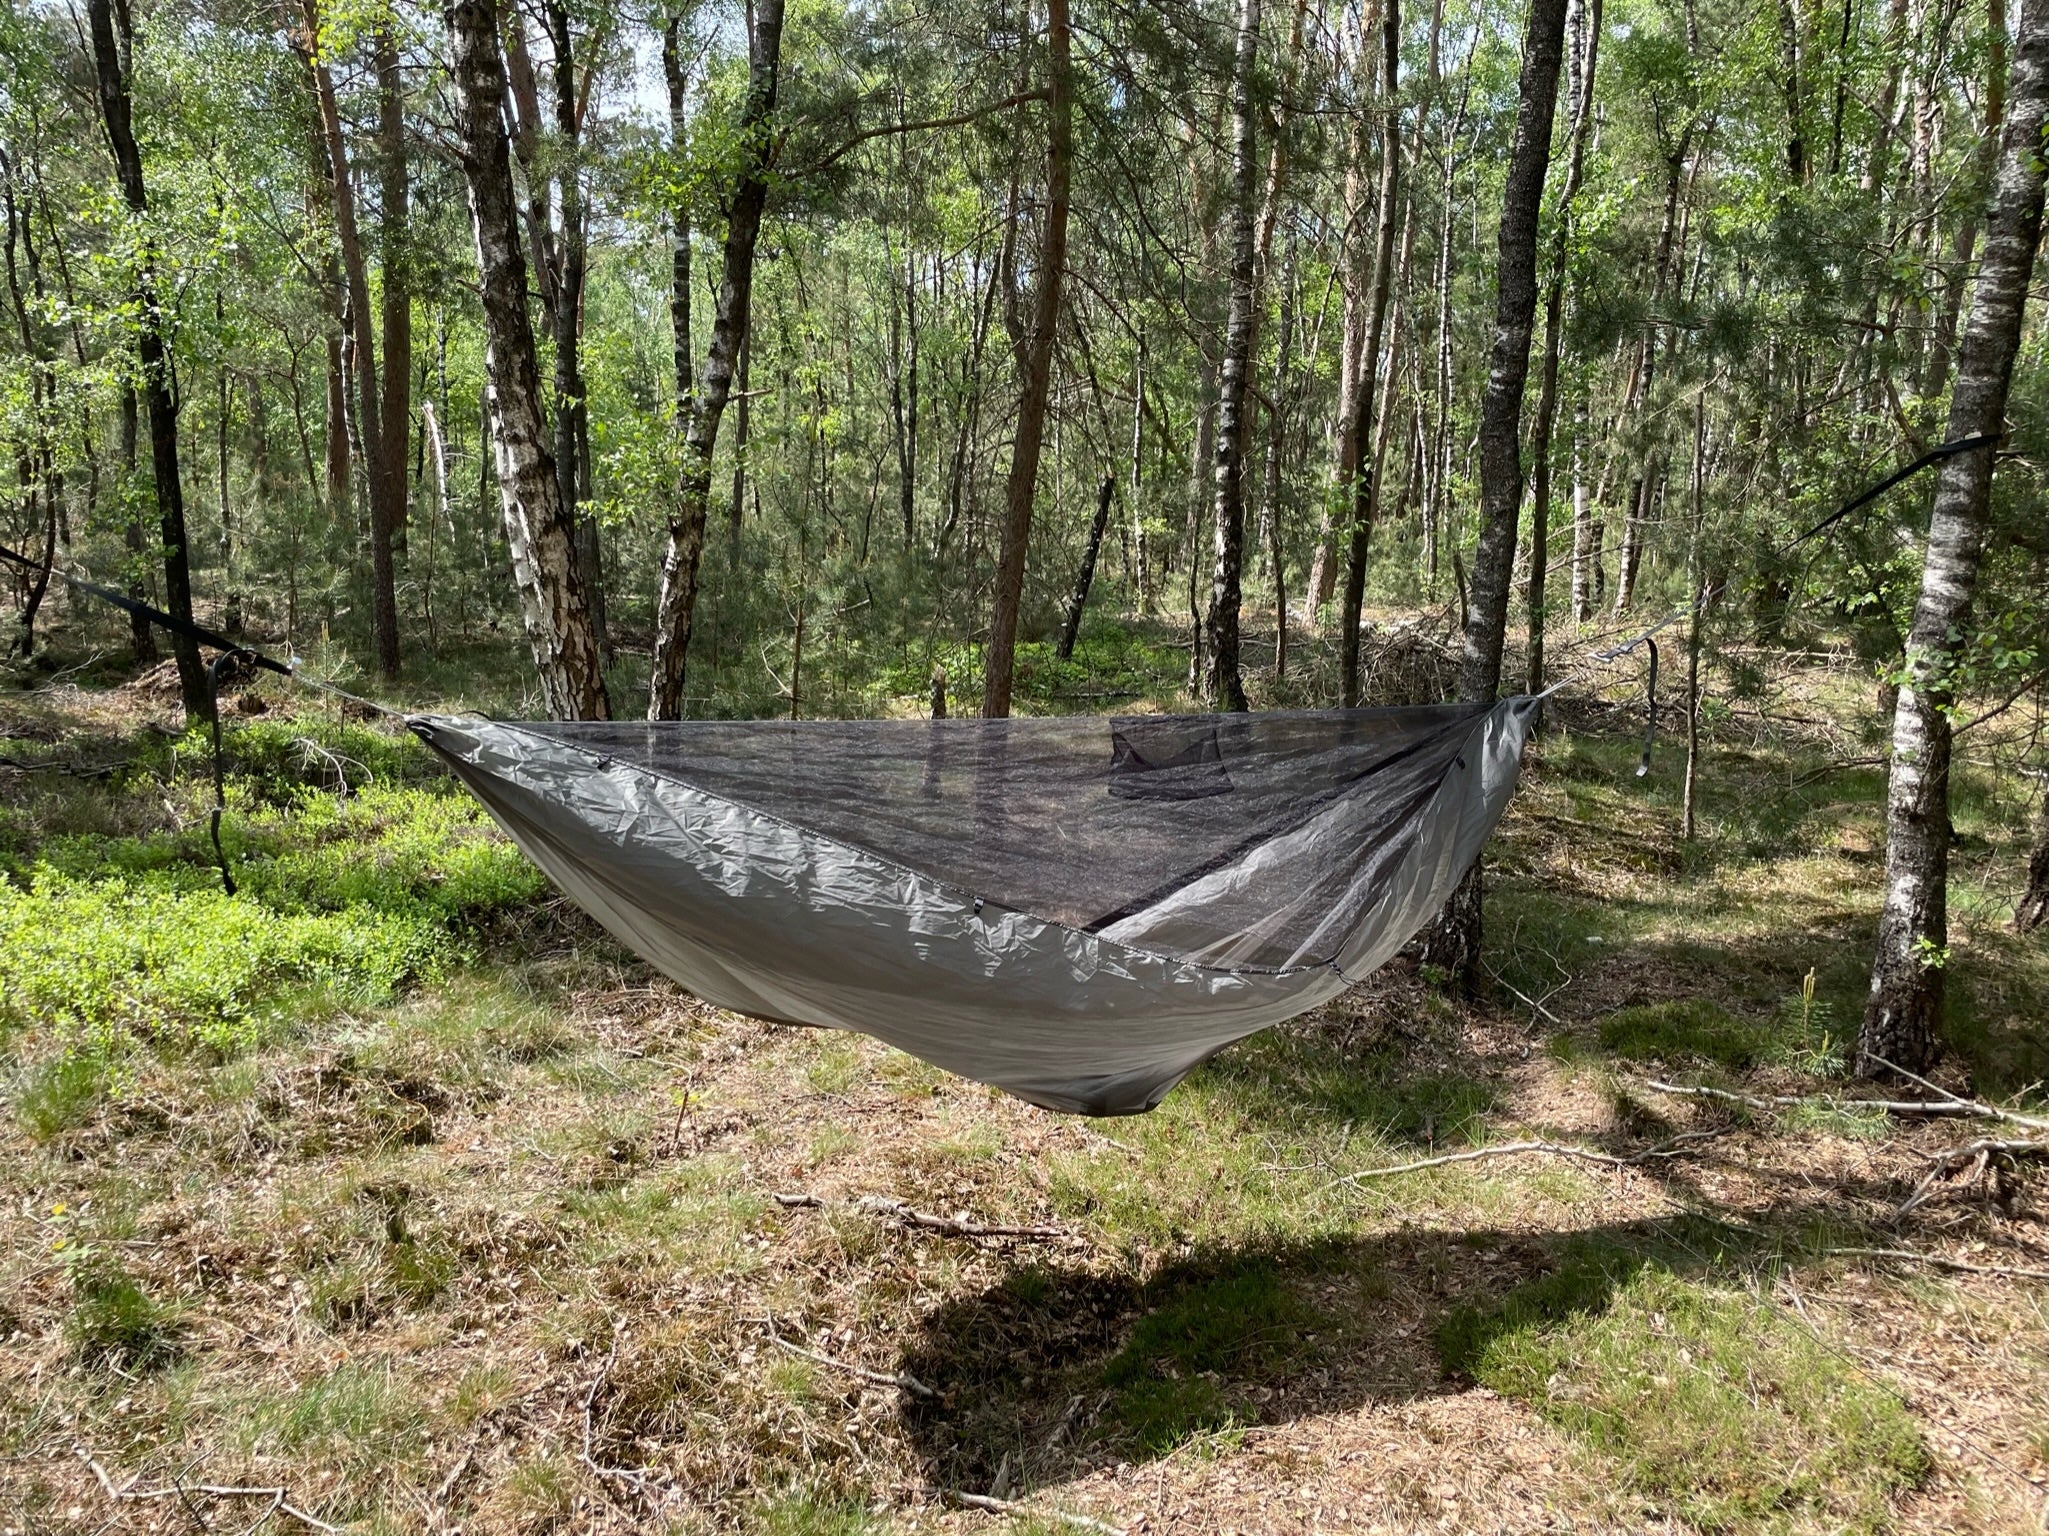 charcoal gray ultralight camping hammock custom made dream hammock with bugnet or mosquito net best